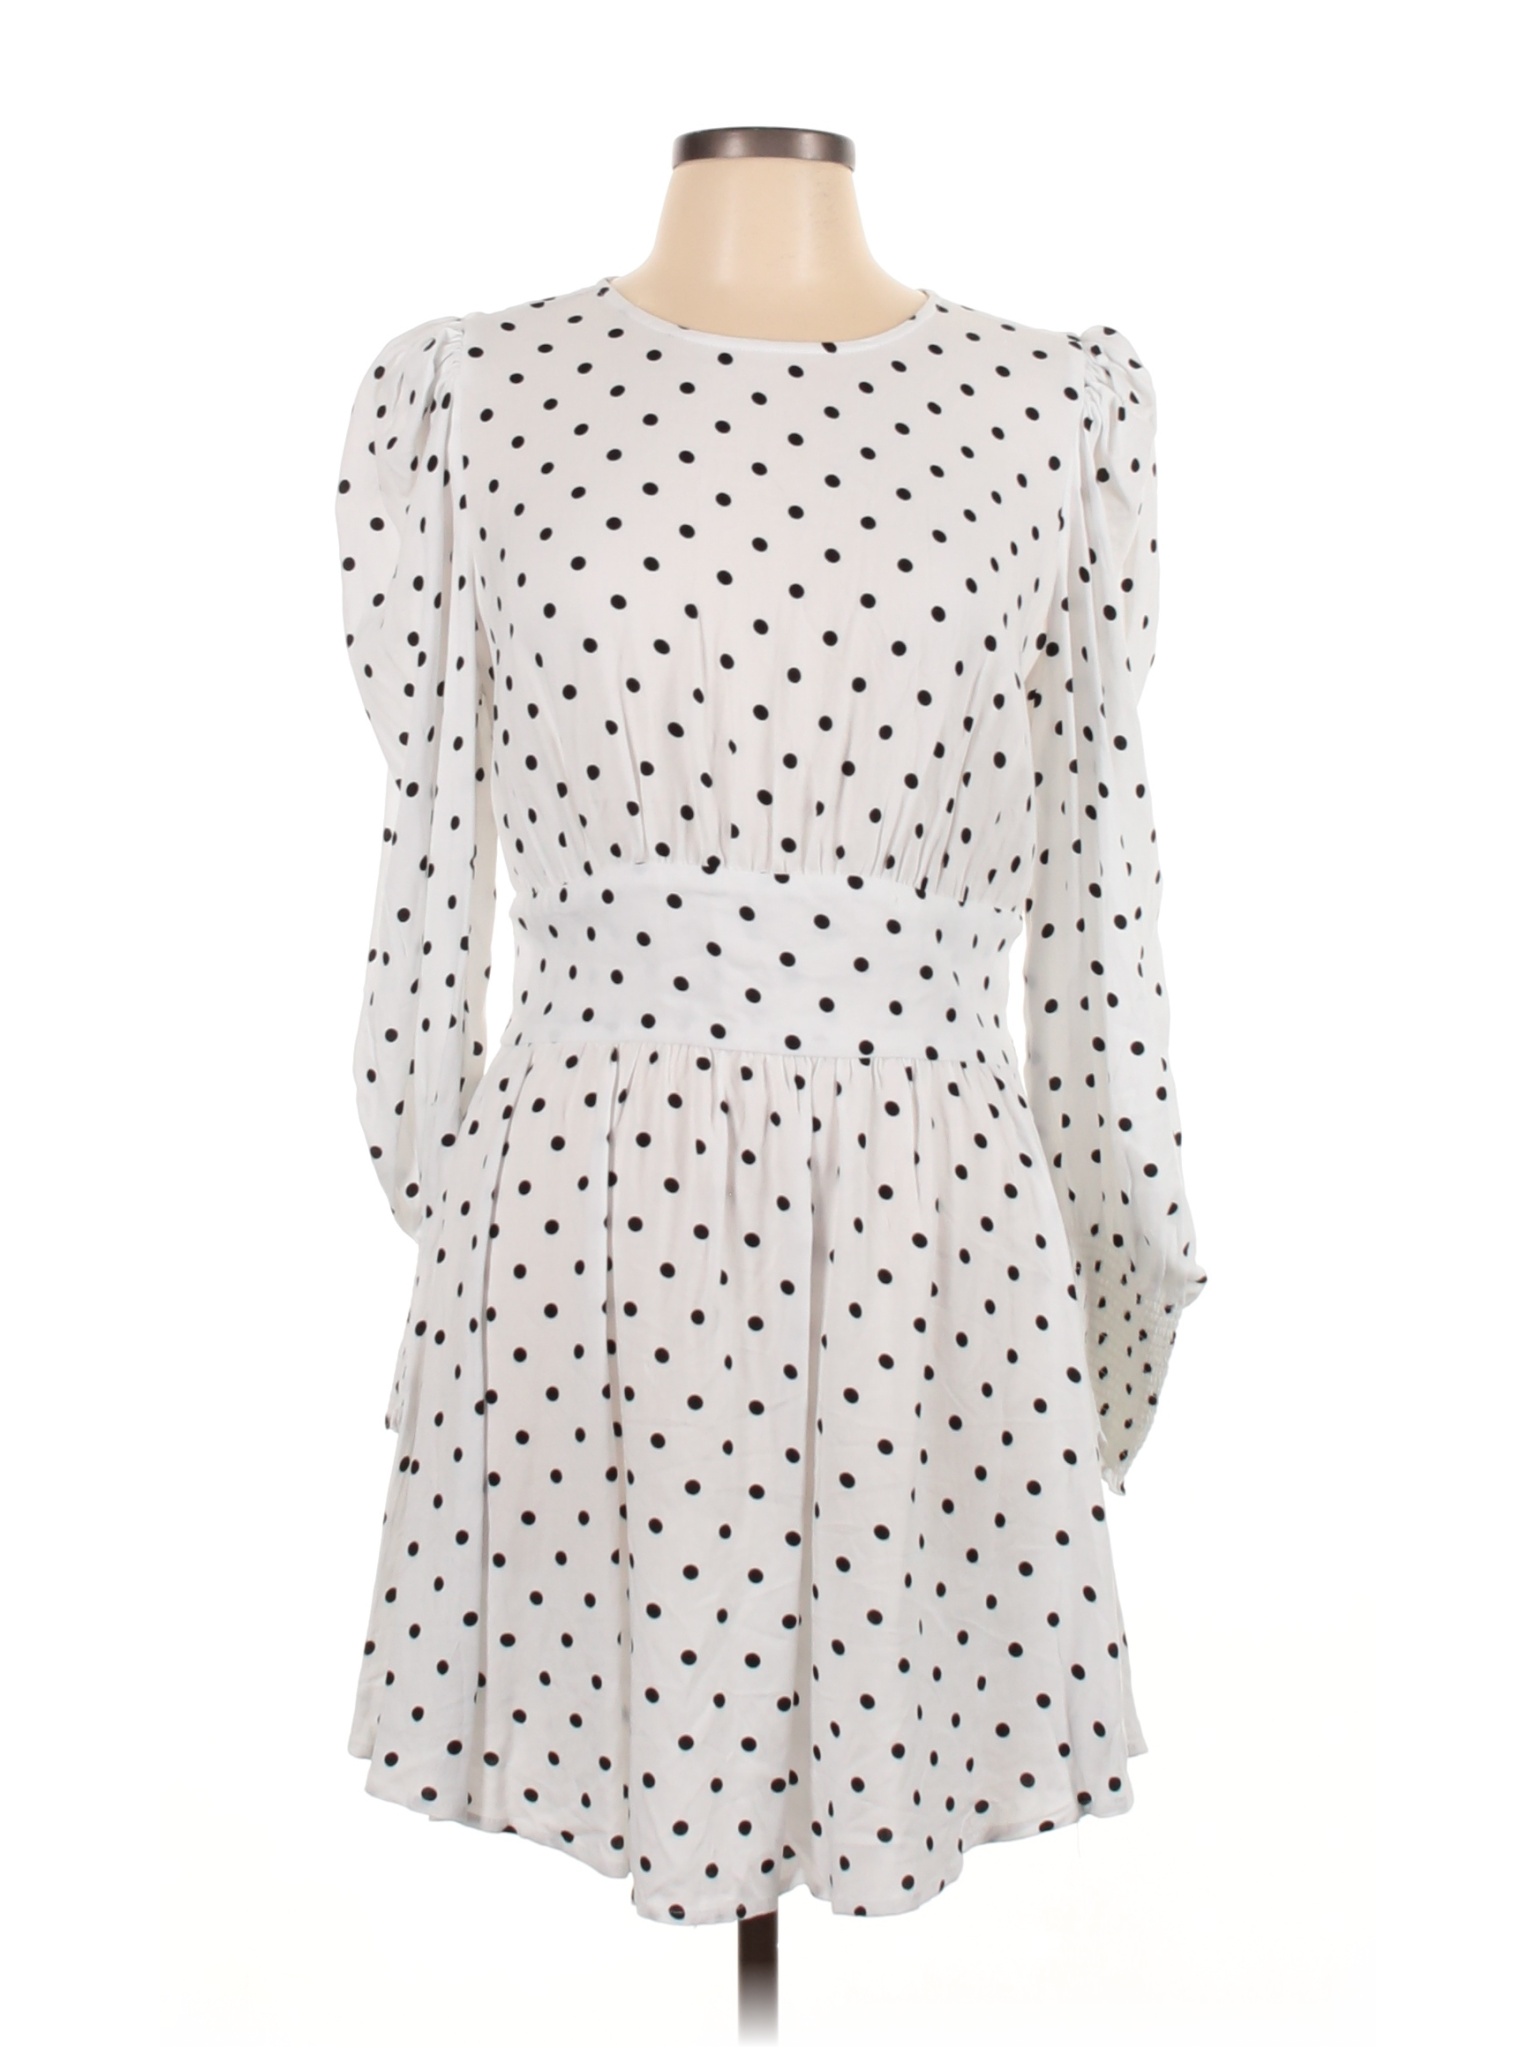 AFRM 100% Rayon Polka Dots White Casual Dress Size L - 65% off | thredUP